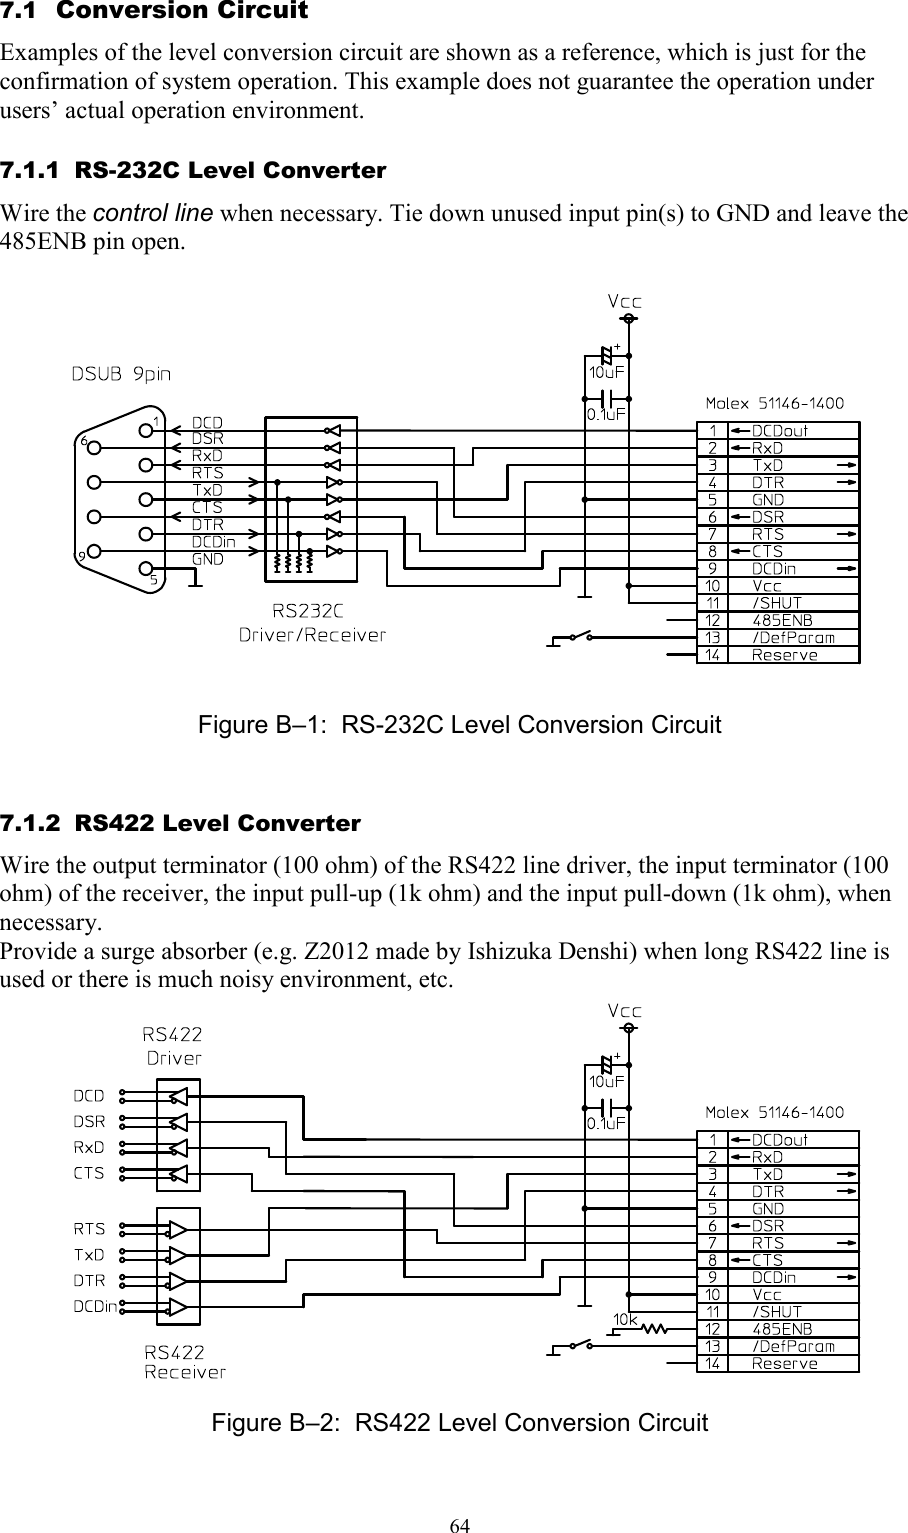   647.1  Conversion Circuit Examples of the level conversion circuit are shown as a reference, which is just for the confirmation of system operation. This example does not guarantee the operation under users’ actual operation environment. 7.1.1  RS-232C Level Converter Wire the control line when necessary. Tie down unused input pin(s) to GND and leave the 485ENB pin open.    Figure B–1:  RS-232C Level Conversion Circuit 7.1.2  RS422 Level Converter Wire the output terminator (100 ohm) of the RS422 line driver, the input terminator (100 ohm) of the receiver, the input pull-up (1k ohm) and the input pull-down (1k ohm), when necessary. Provide a surge absorber (e.g. Z2012 made by Ishizuka Denshi) when long RS422 line is used or there is much noisy environment, etc.  Figure B–2:  RS422 Level Conversion Circuit 